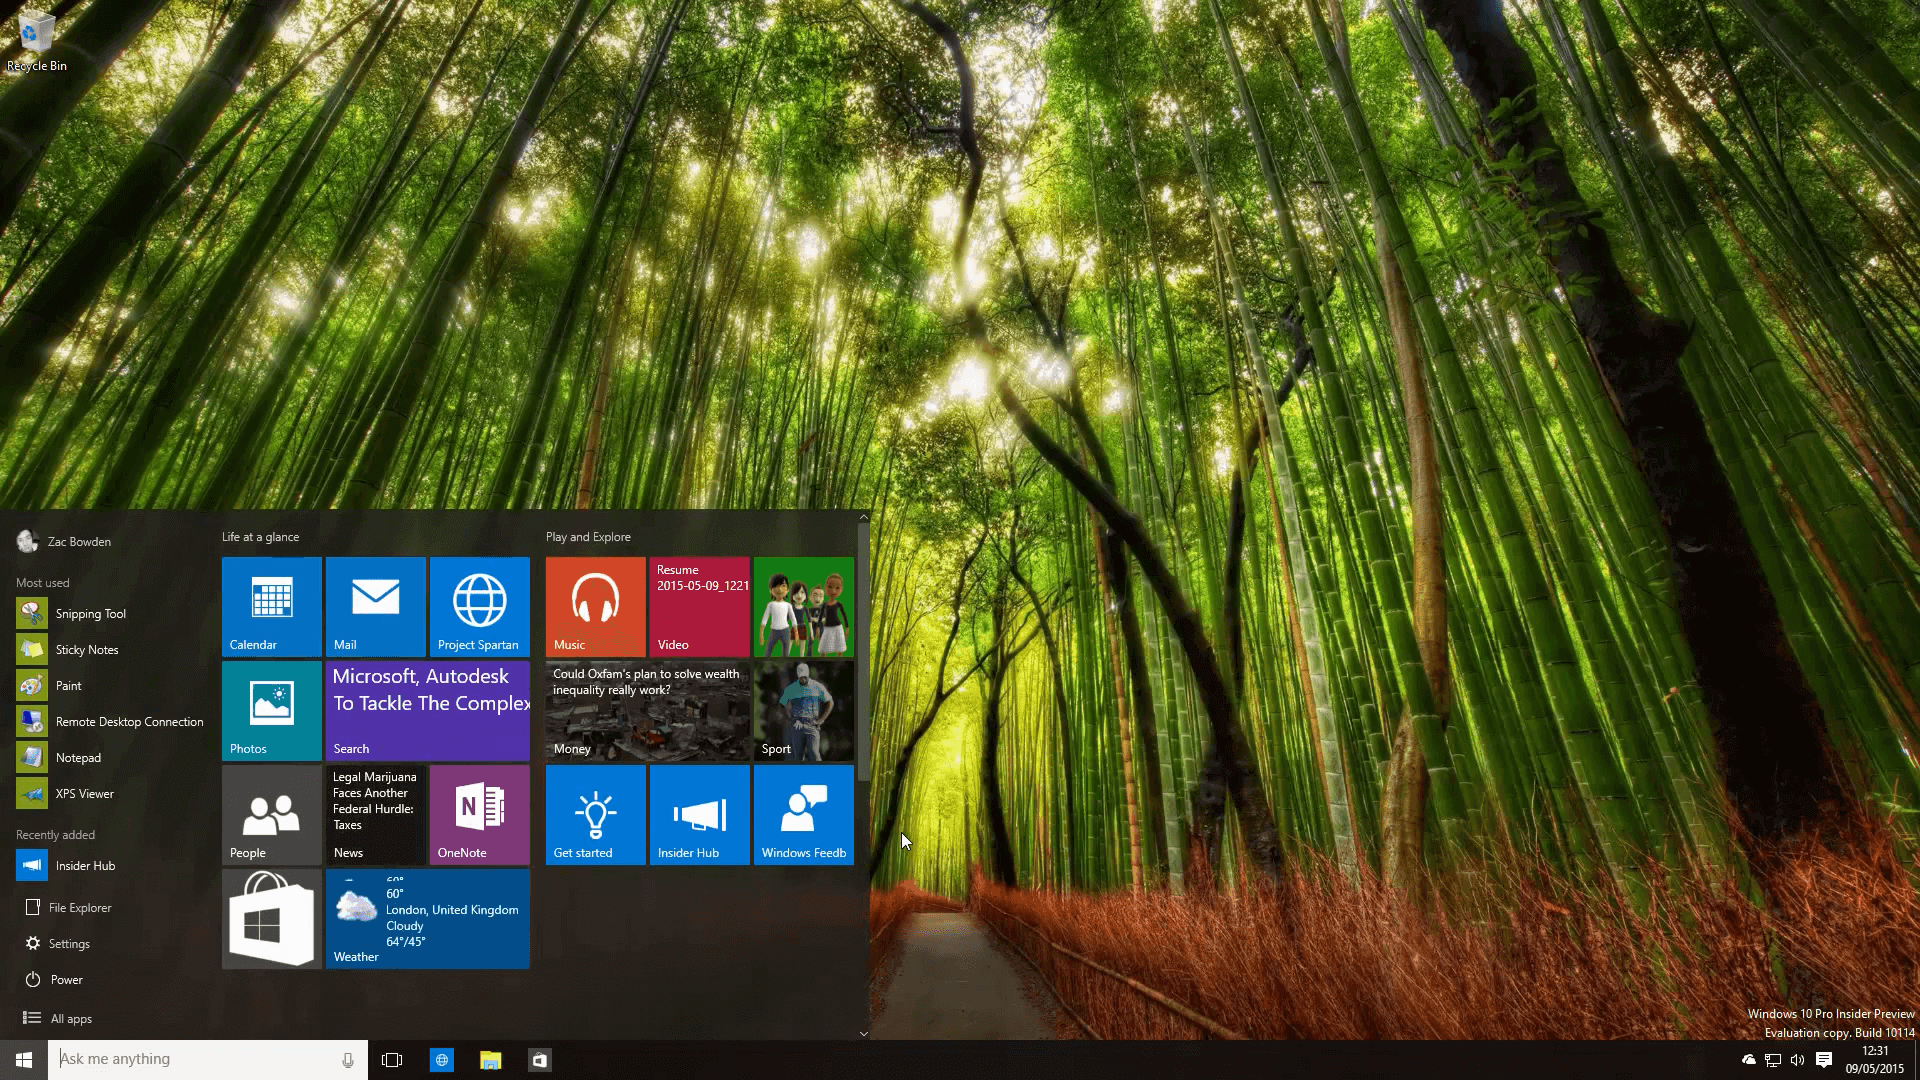 Windows10 Insider Preview - Build 10114